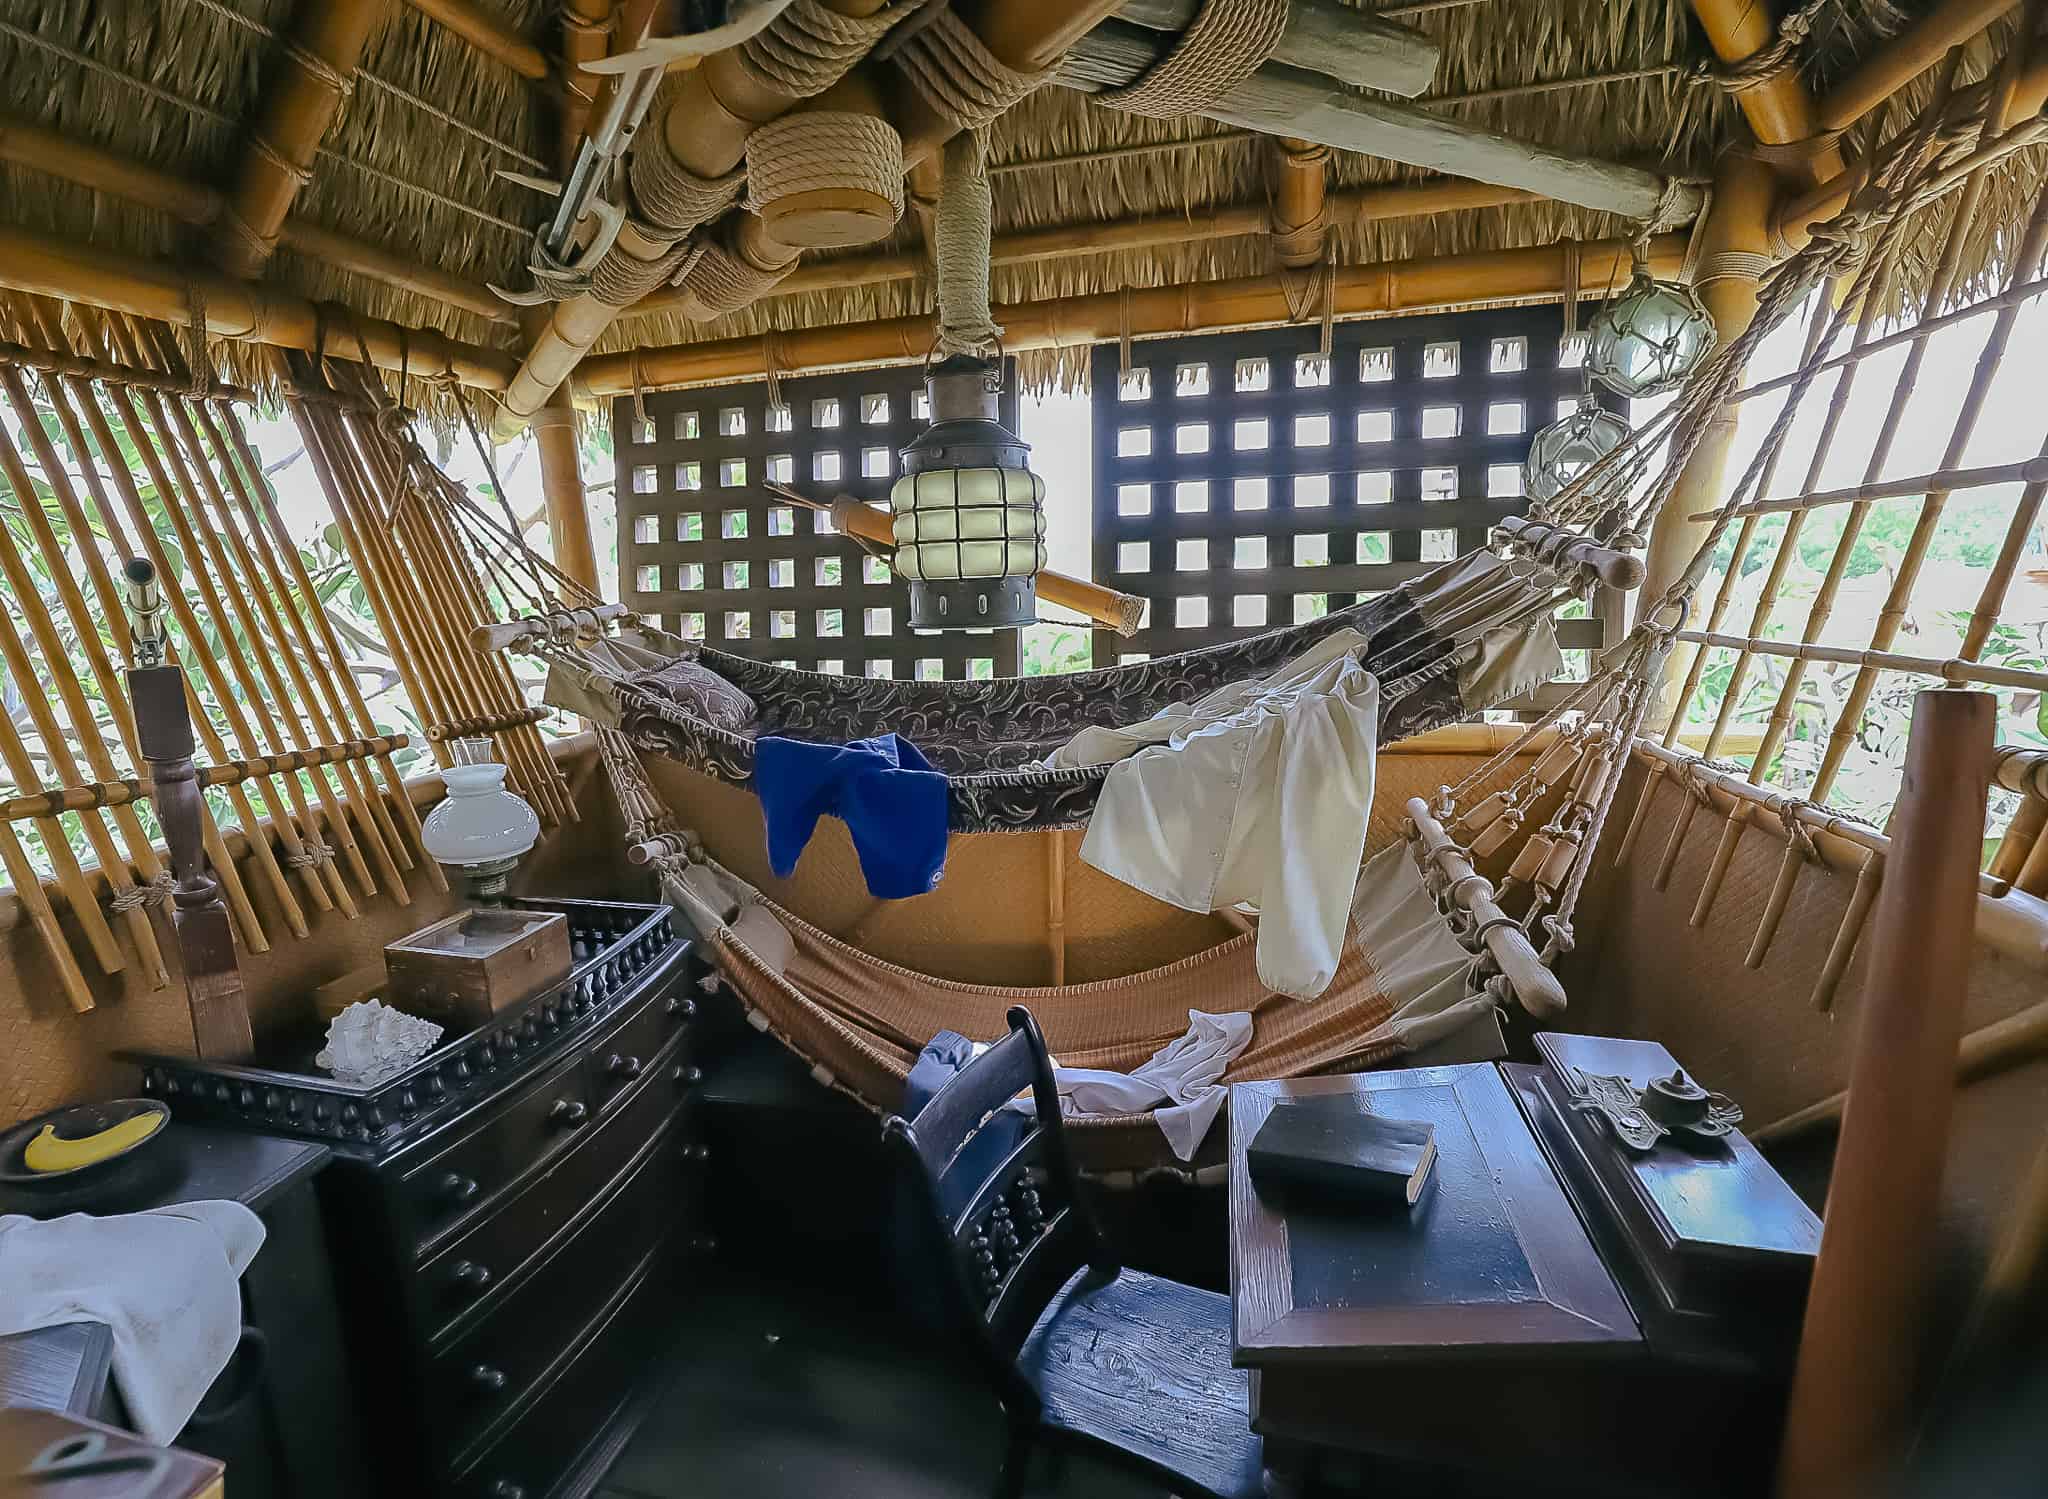 two beds made from hammocks similar to bunk beds 